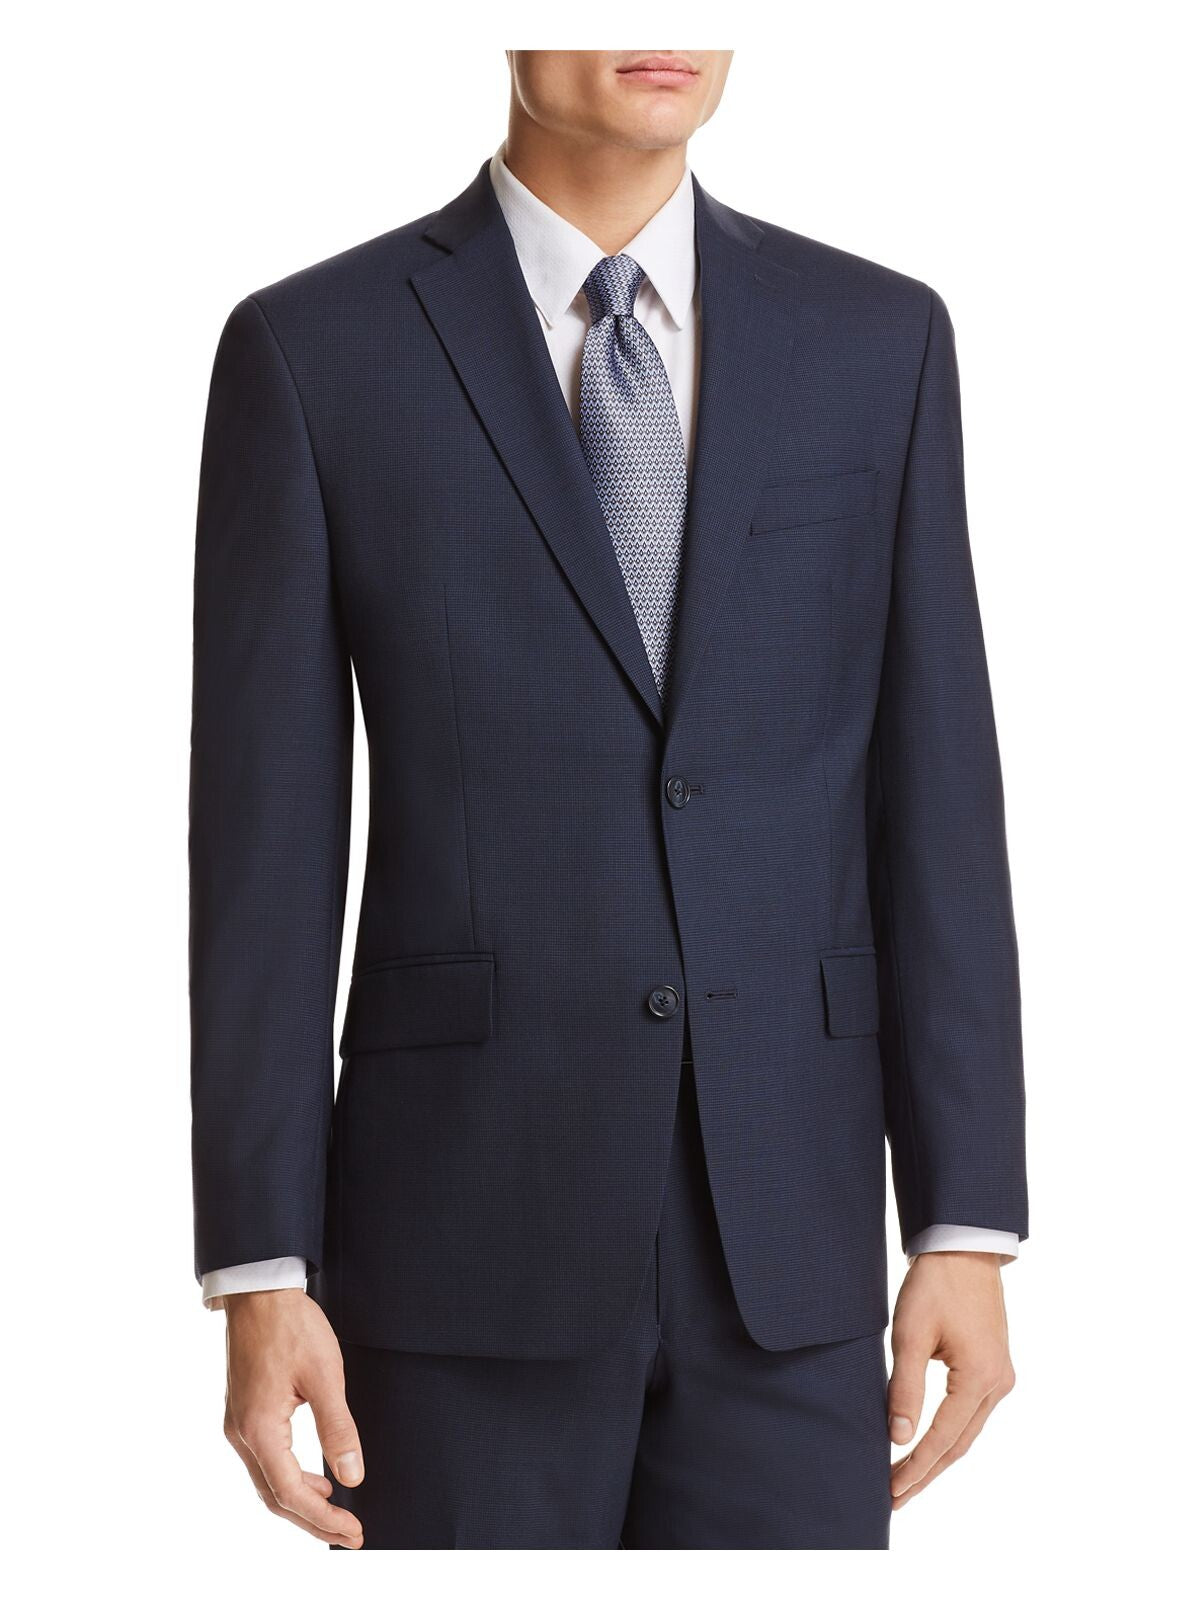 MICHAEL KORS Mens Navy Single Breasted, Stretch, Classic Fit Wool Blend Suit Separate Blazer Jacket 36